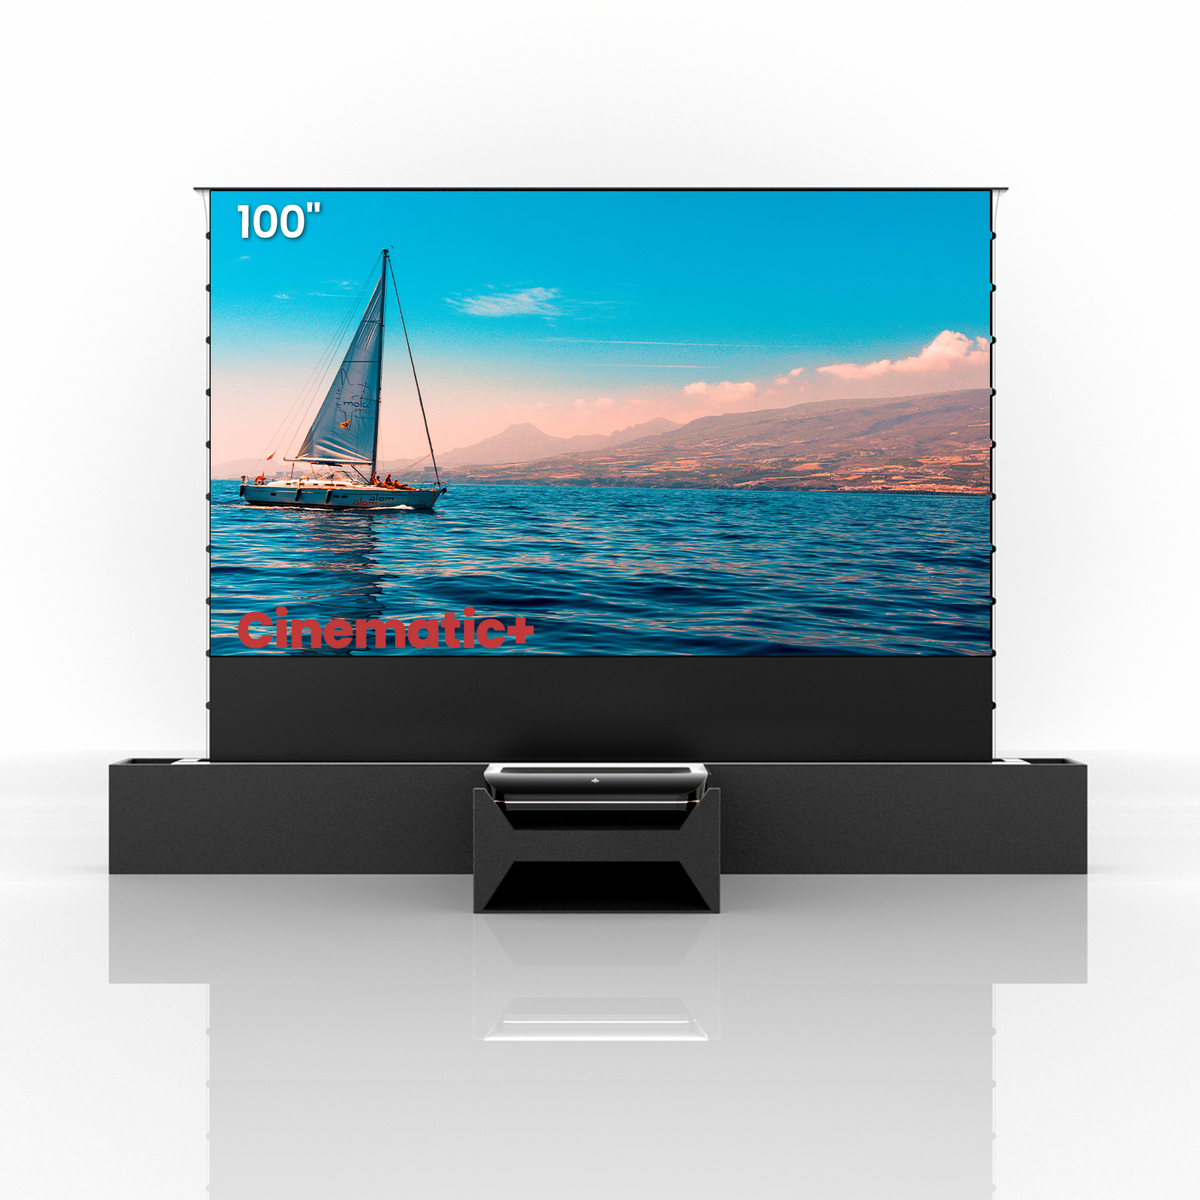 AWOL Vision LTV-3000 Pro showcases a stunning sailing scene on a 100-inch Cinematic+ screen, complemented by the sleek AWOL Vision Station.